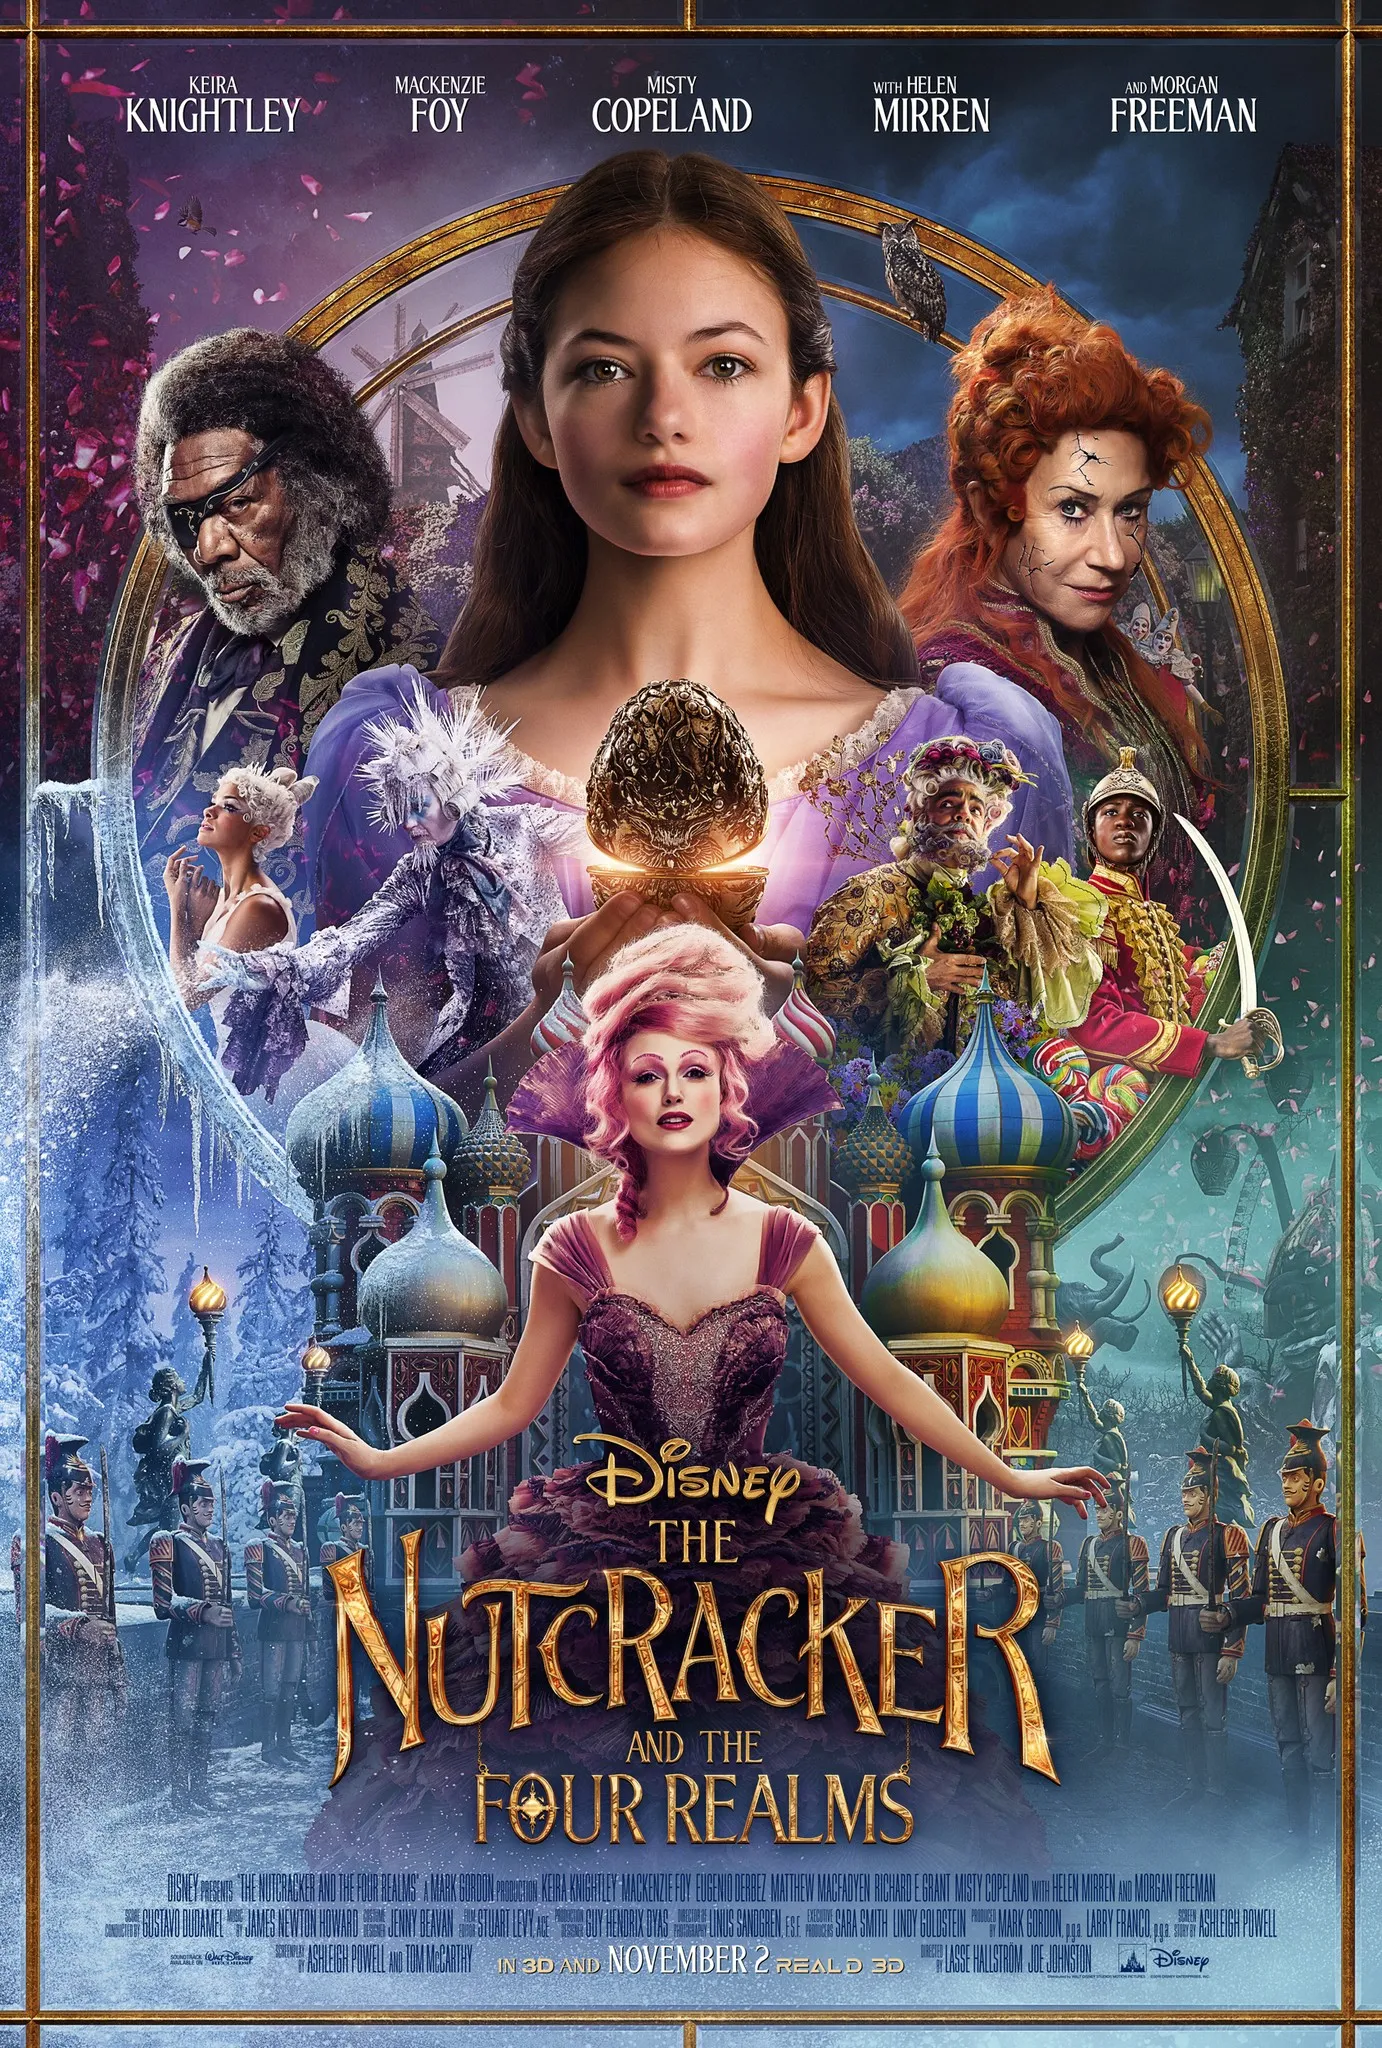 The Nutcracker and the Four Realms 2018 Hindi Dual Audio 1080p | 720p | 480p BluRay ESub Download